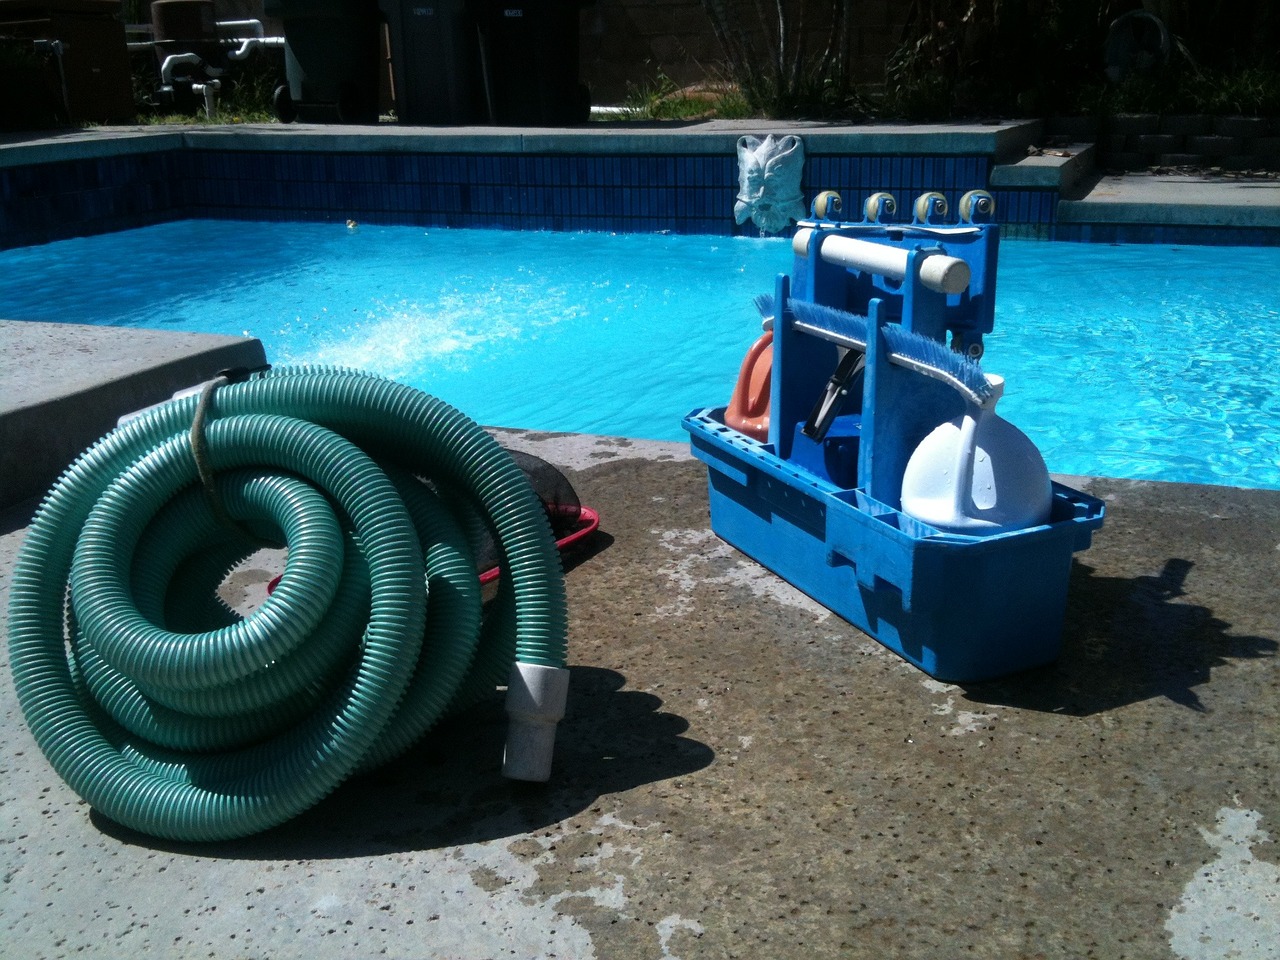 cleaning equipment for a pool